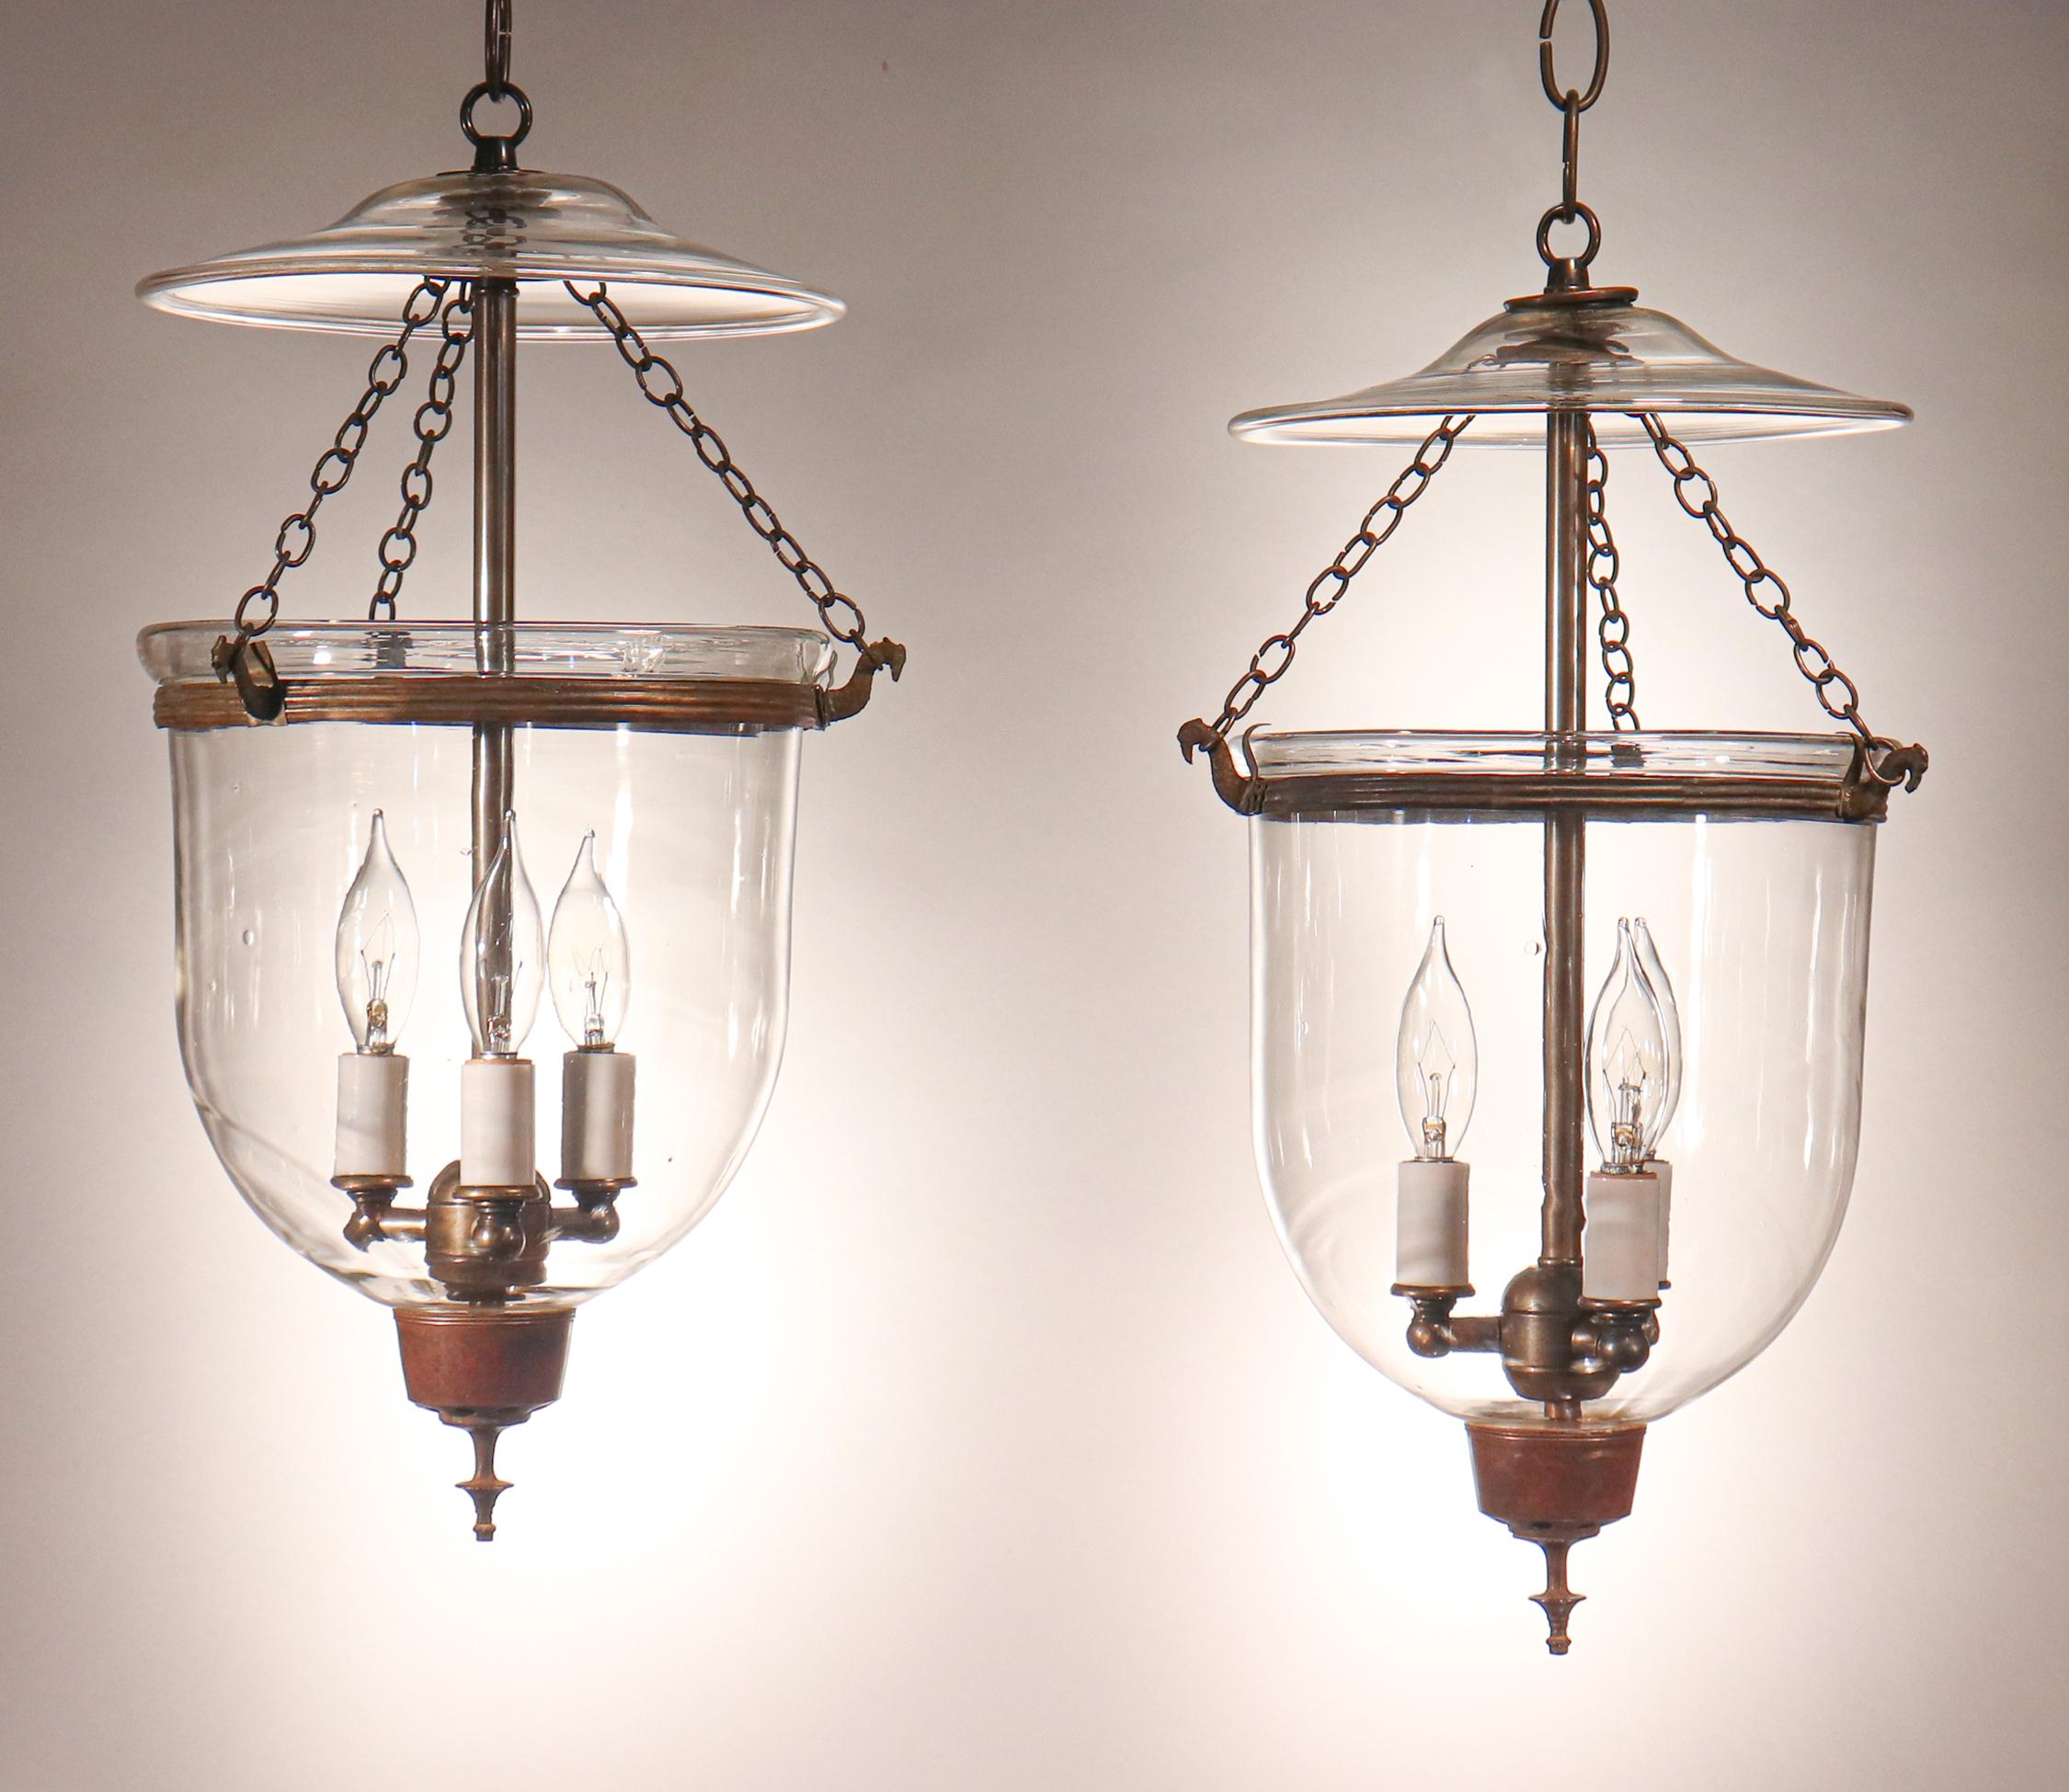 A rare, well-matched pair of petite English bell jar lanterns, circa 1870. These antique pendants feature excellent quality hand blown glass and original rolled brass bands and finials/candleholder bases. The fixtures have been newly electrified,